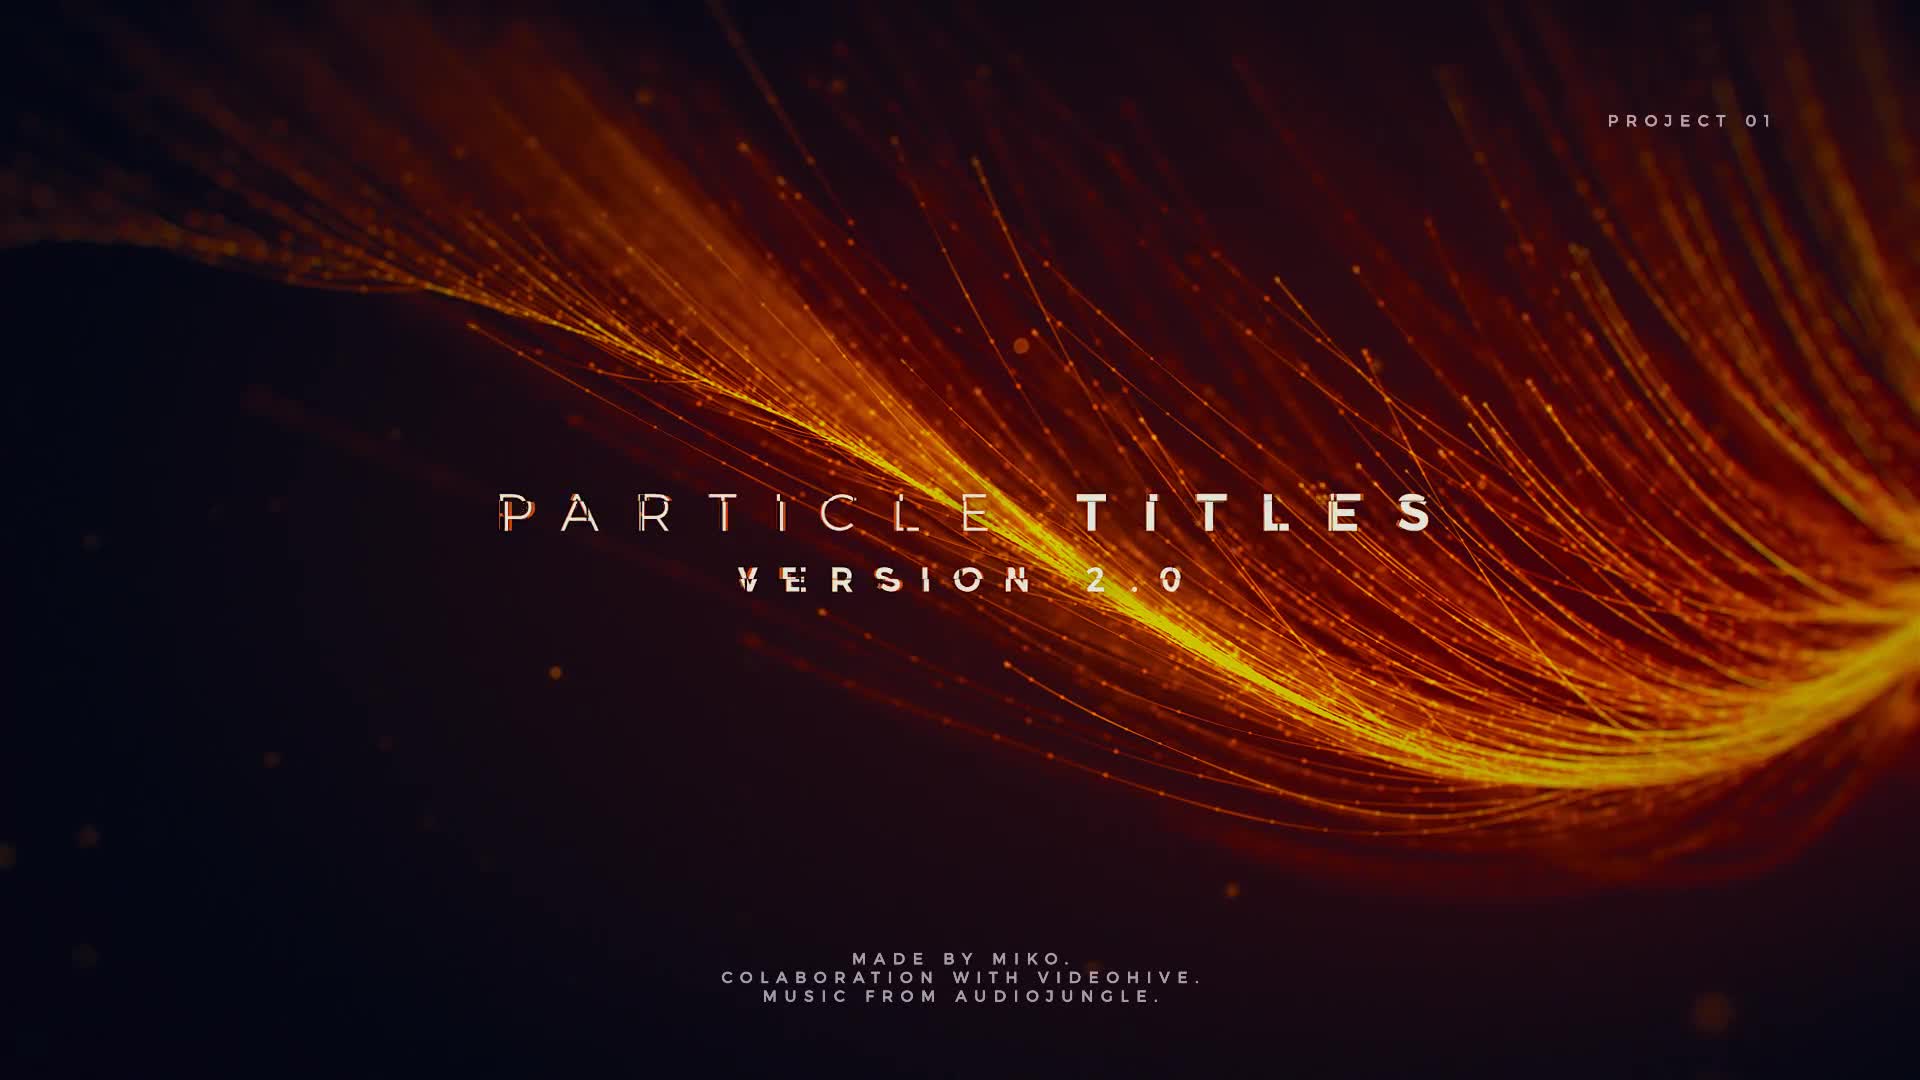 Particle Titles V2 - Download Videohive 20592042